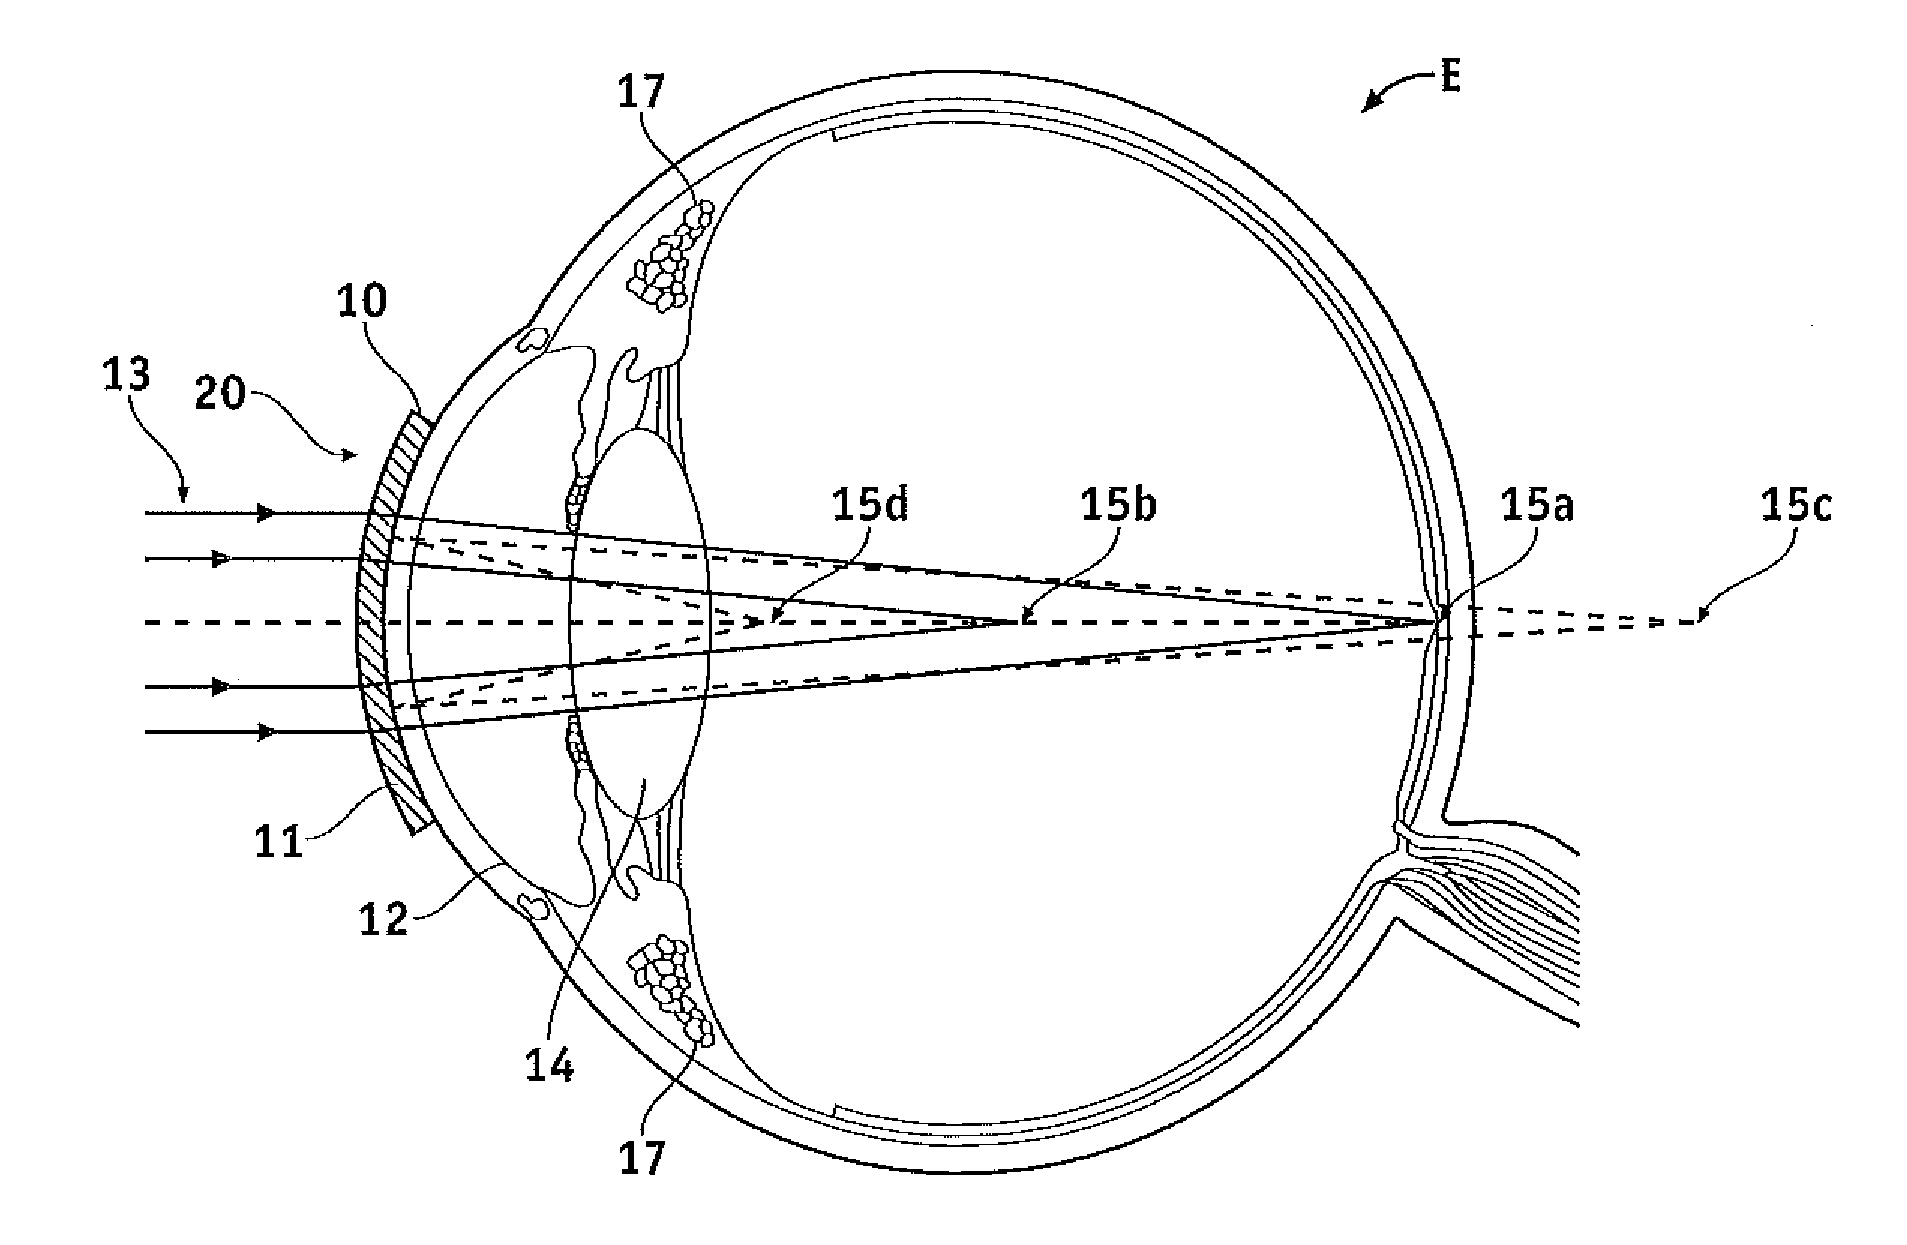 Pupil dependent diffractive lens for near, intermediate, and far vision